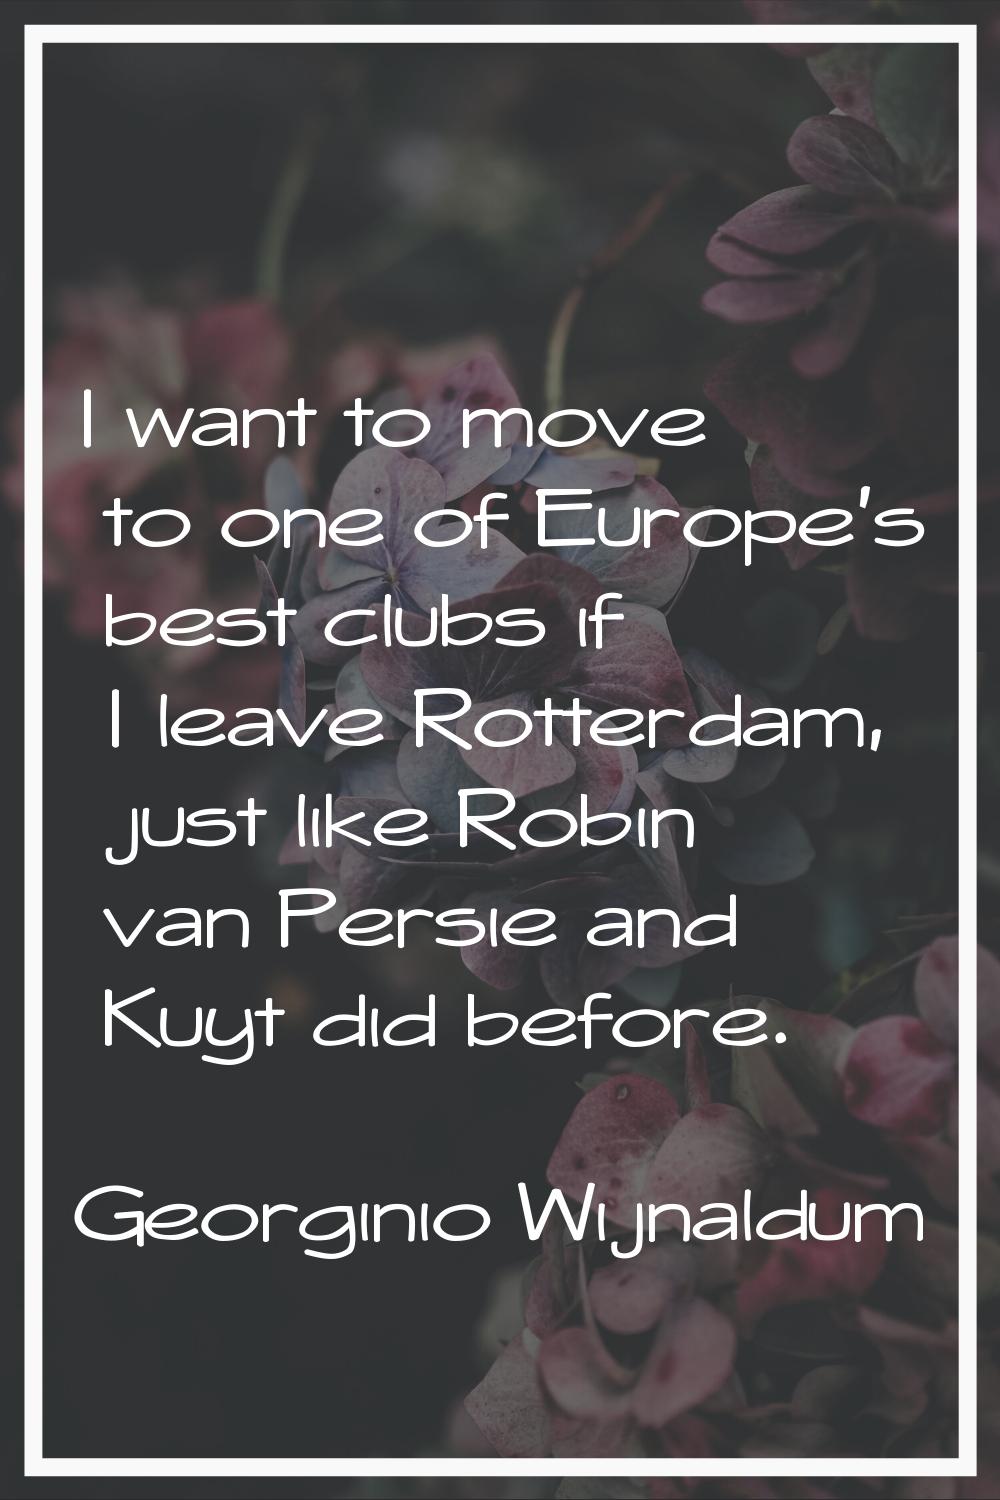 I want to move to one of Europe's best clubs if I leave Rotterdam, just like Robin van Persie and K